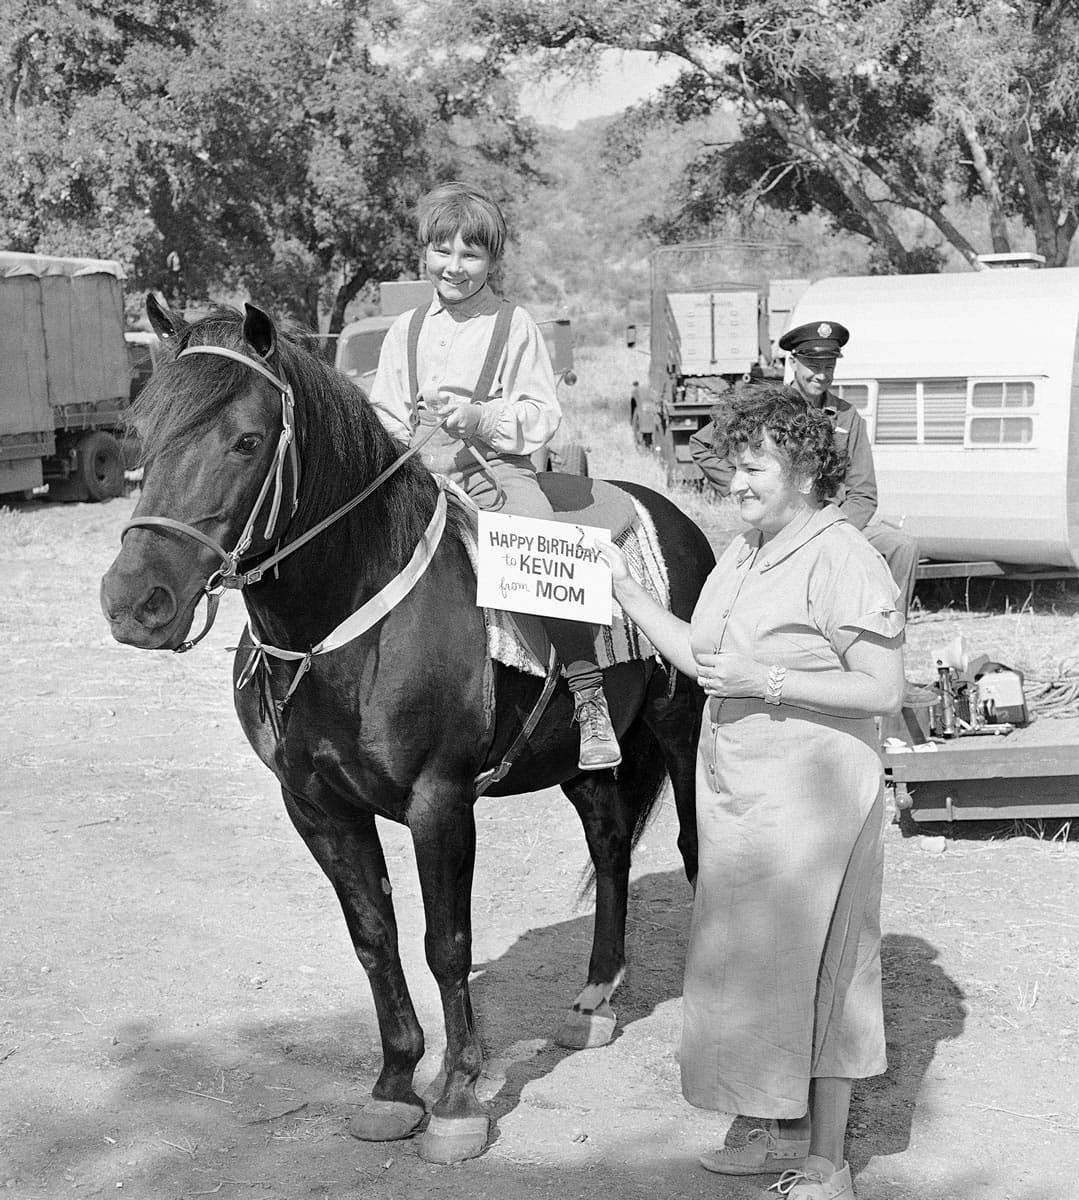 Ten-year-old Kevin Corcoran tries out his birthday present on June 10, 1959, at a party during the filming of &quot;Toby Tyler.&quot; The horse was a gift from his mother.